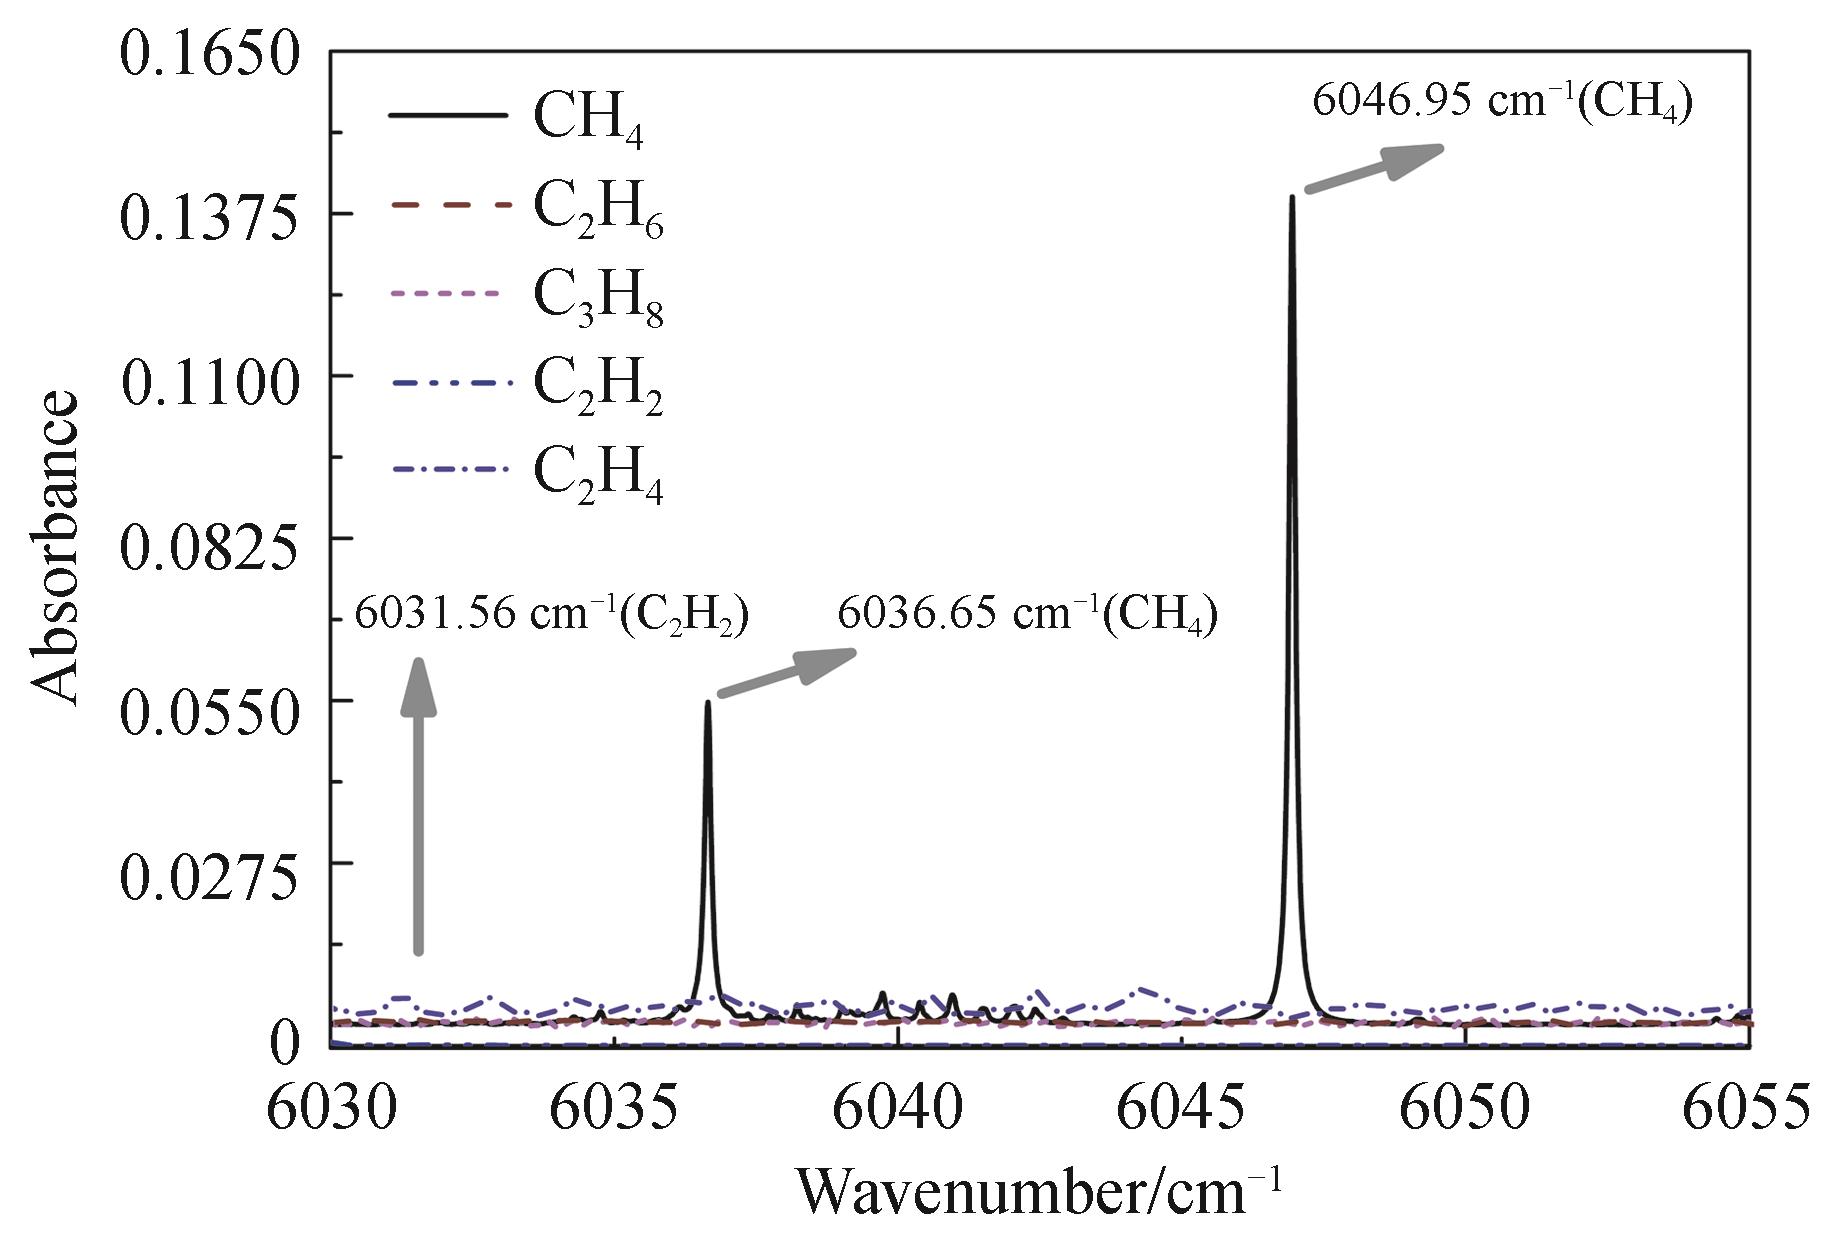 The absorption spectrum of CH4， C2H6， C3H8， C2H2 and C2H4 within 6 030~6 055 cm-1